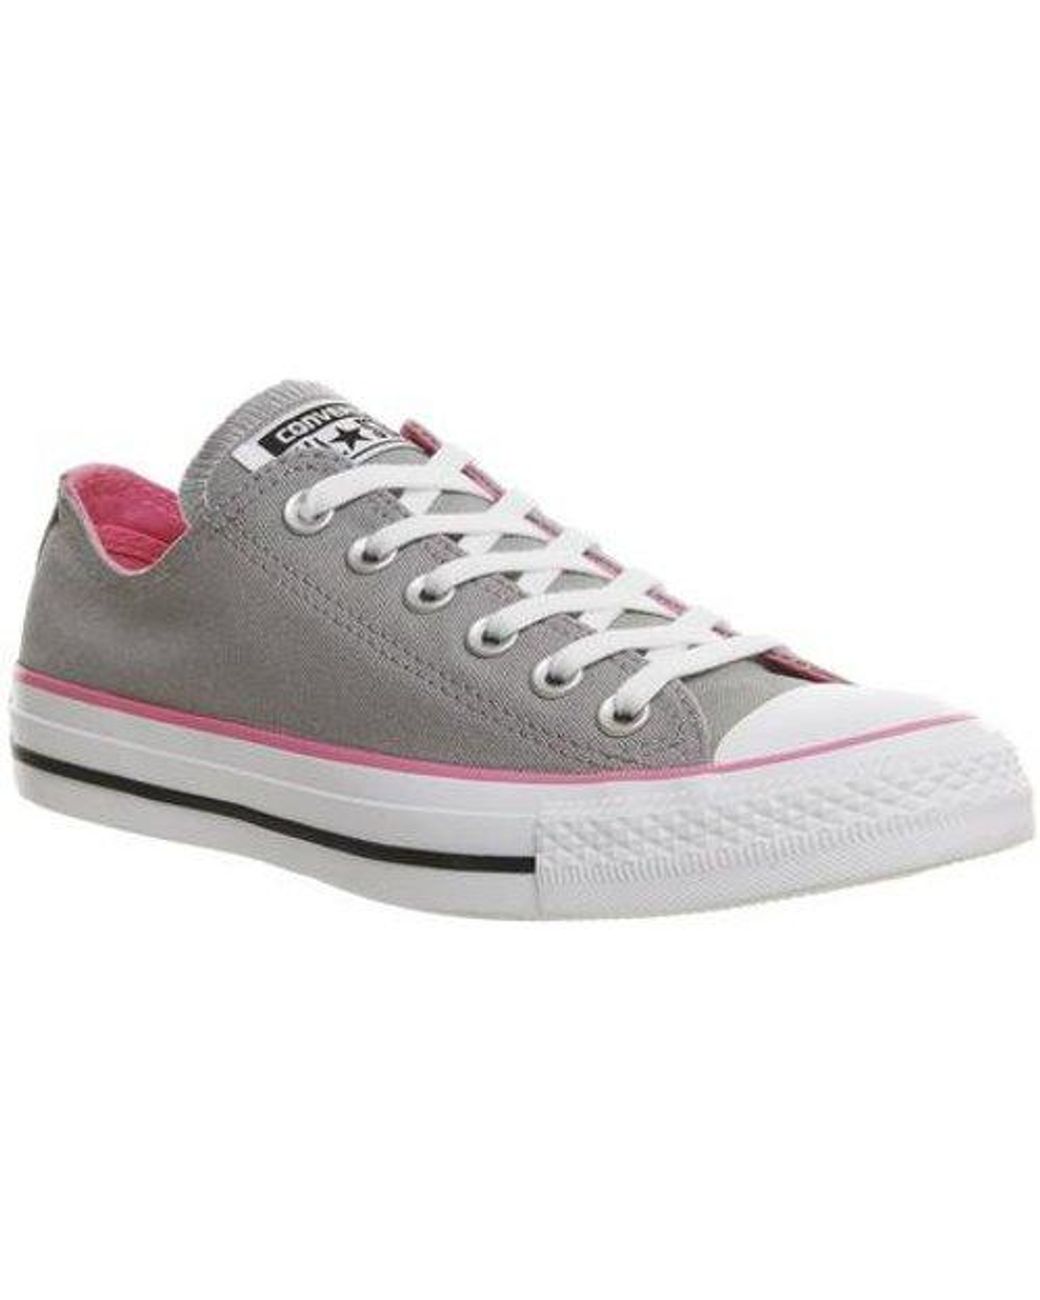 Converse All Star Low Grey Pink Canvas, Buy Now, Hotsell, 59% OFF,  sportsregras.com